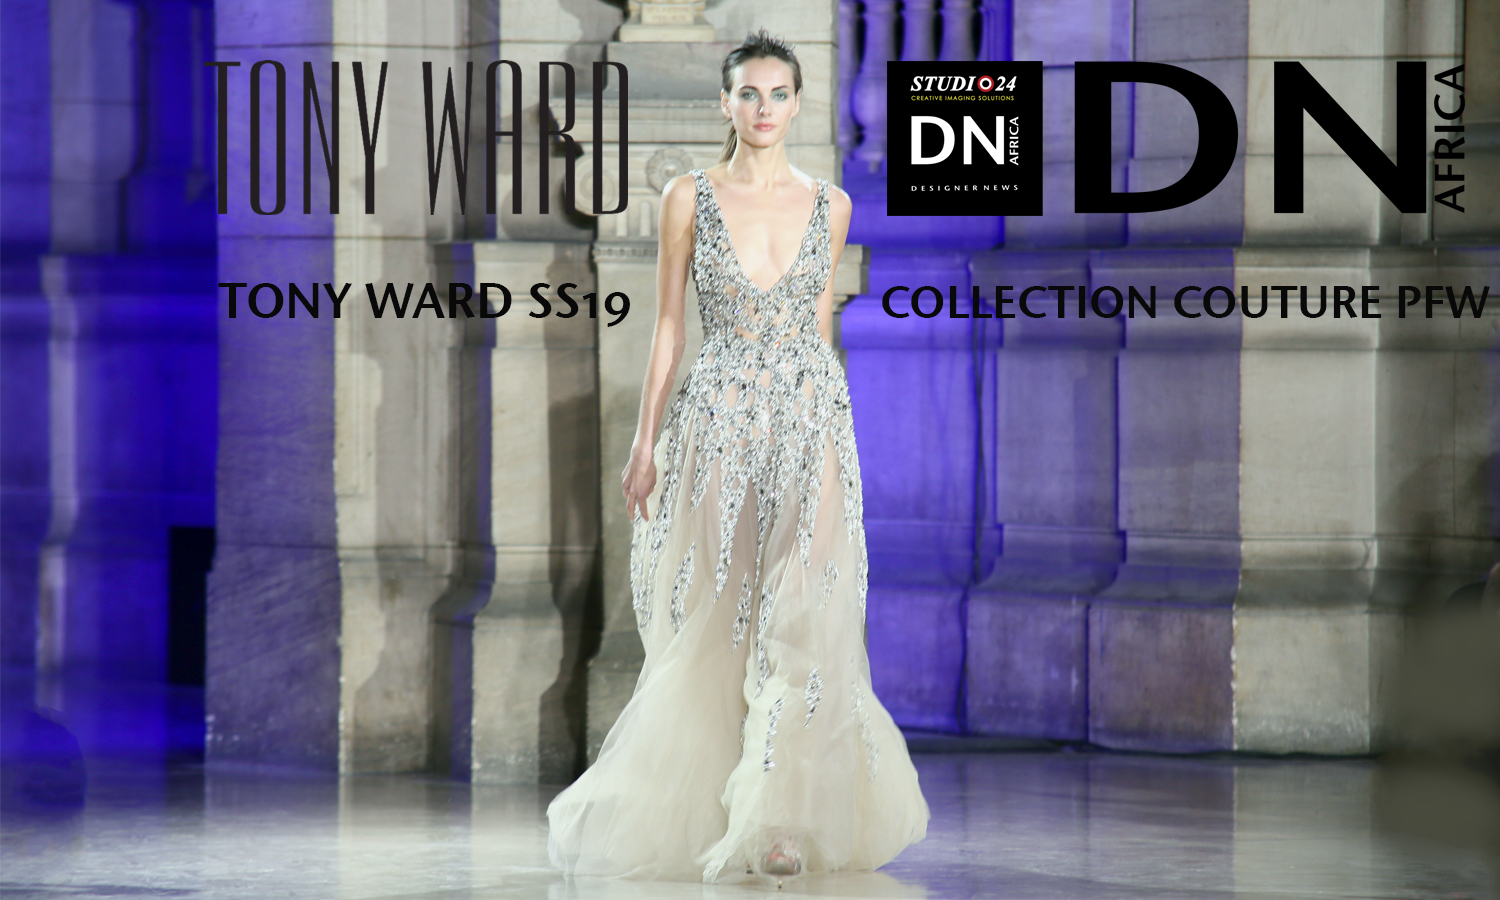 AFRICAN FASHION STYLE MAGAZINE - PFW FW19 - Designer TONY-WARD-SS19-COLLECTION- COUTURE.-Model Valerie AYENA - Ecole de Medecine-PR L'APPART PR - Official Media Partner DN AFRICA -STUDIO 24 NIGERIA - STUDIO 24 INTERNATIONAL - Ifeanyi Christopher Oputa MD AND CEO OF COLVI LIMITED AND STUDIO 24 - CHEVEUX CHERIE STUDIO BY MARIEME DUBOZ